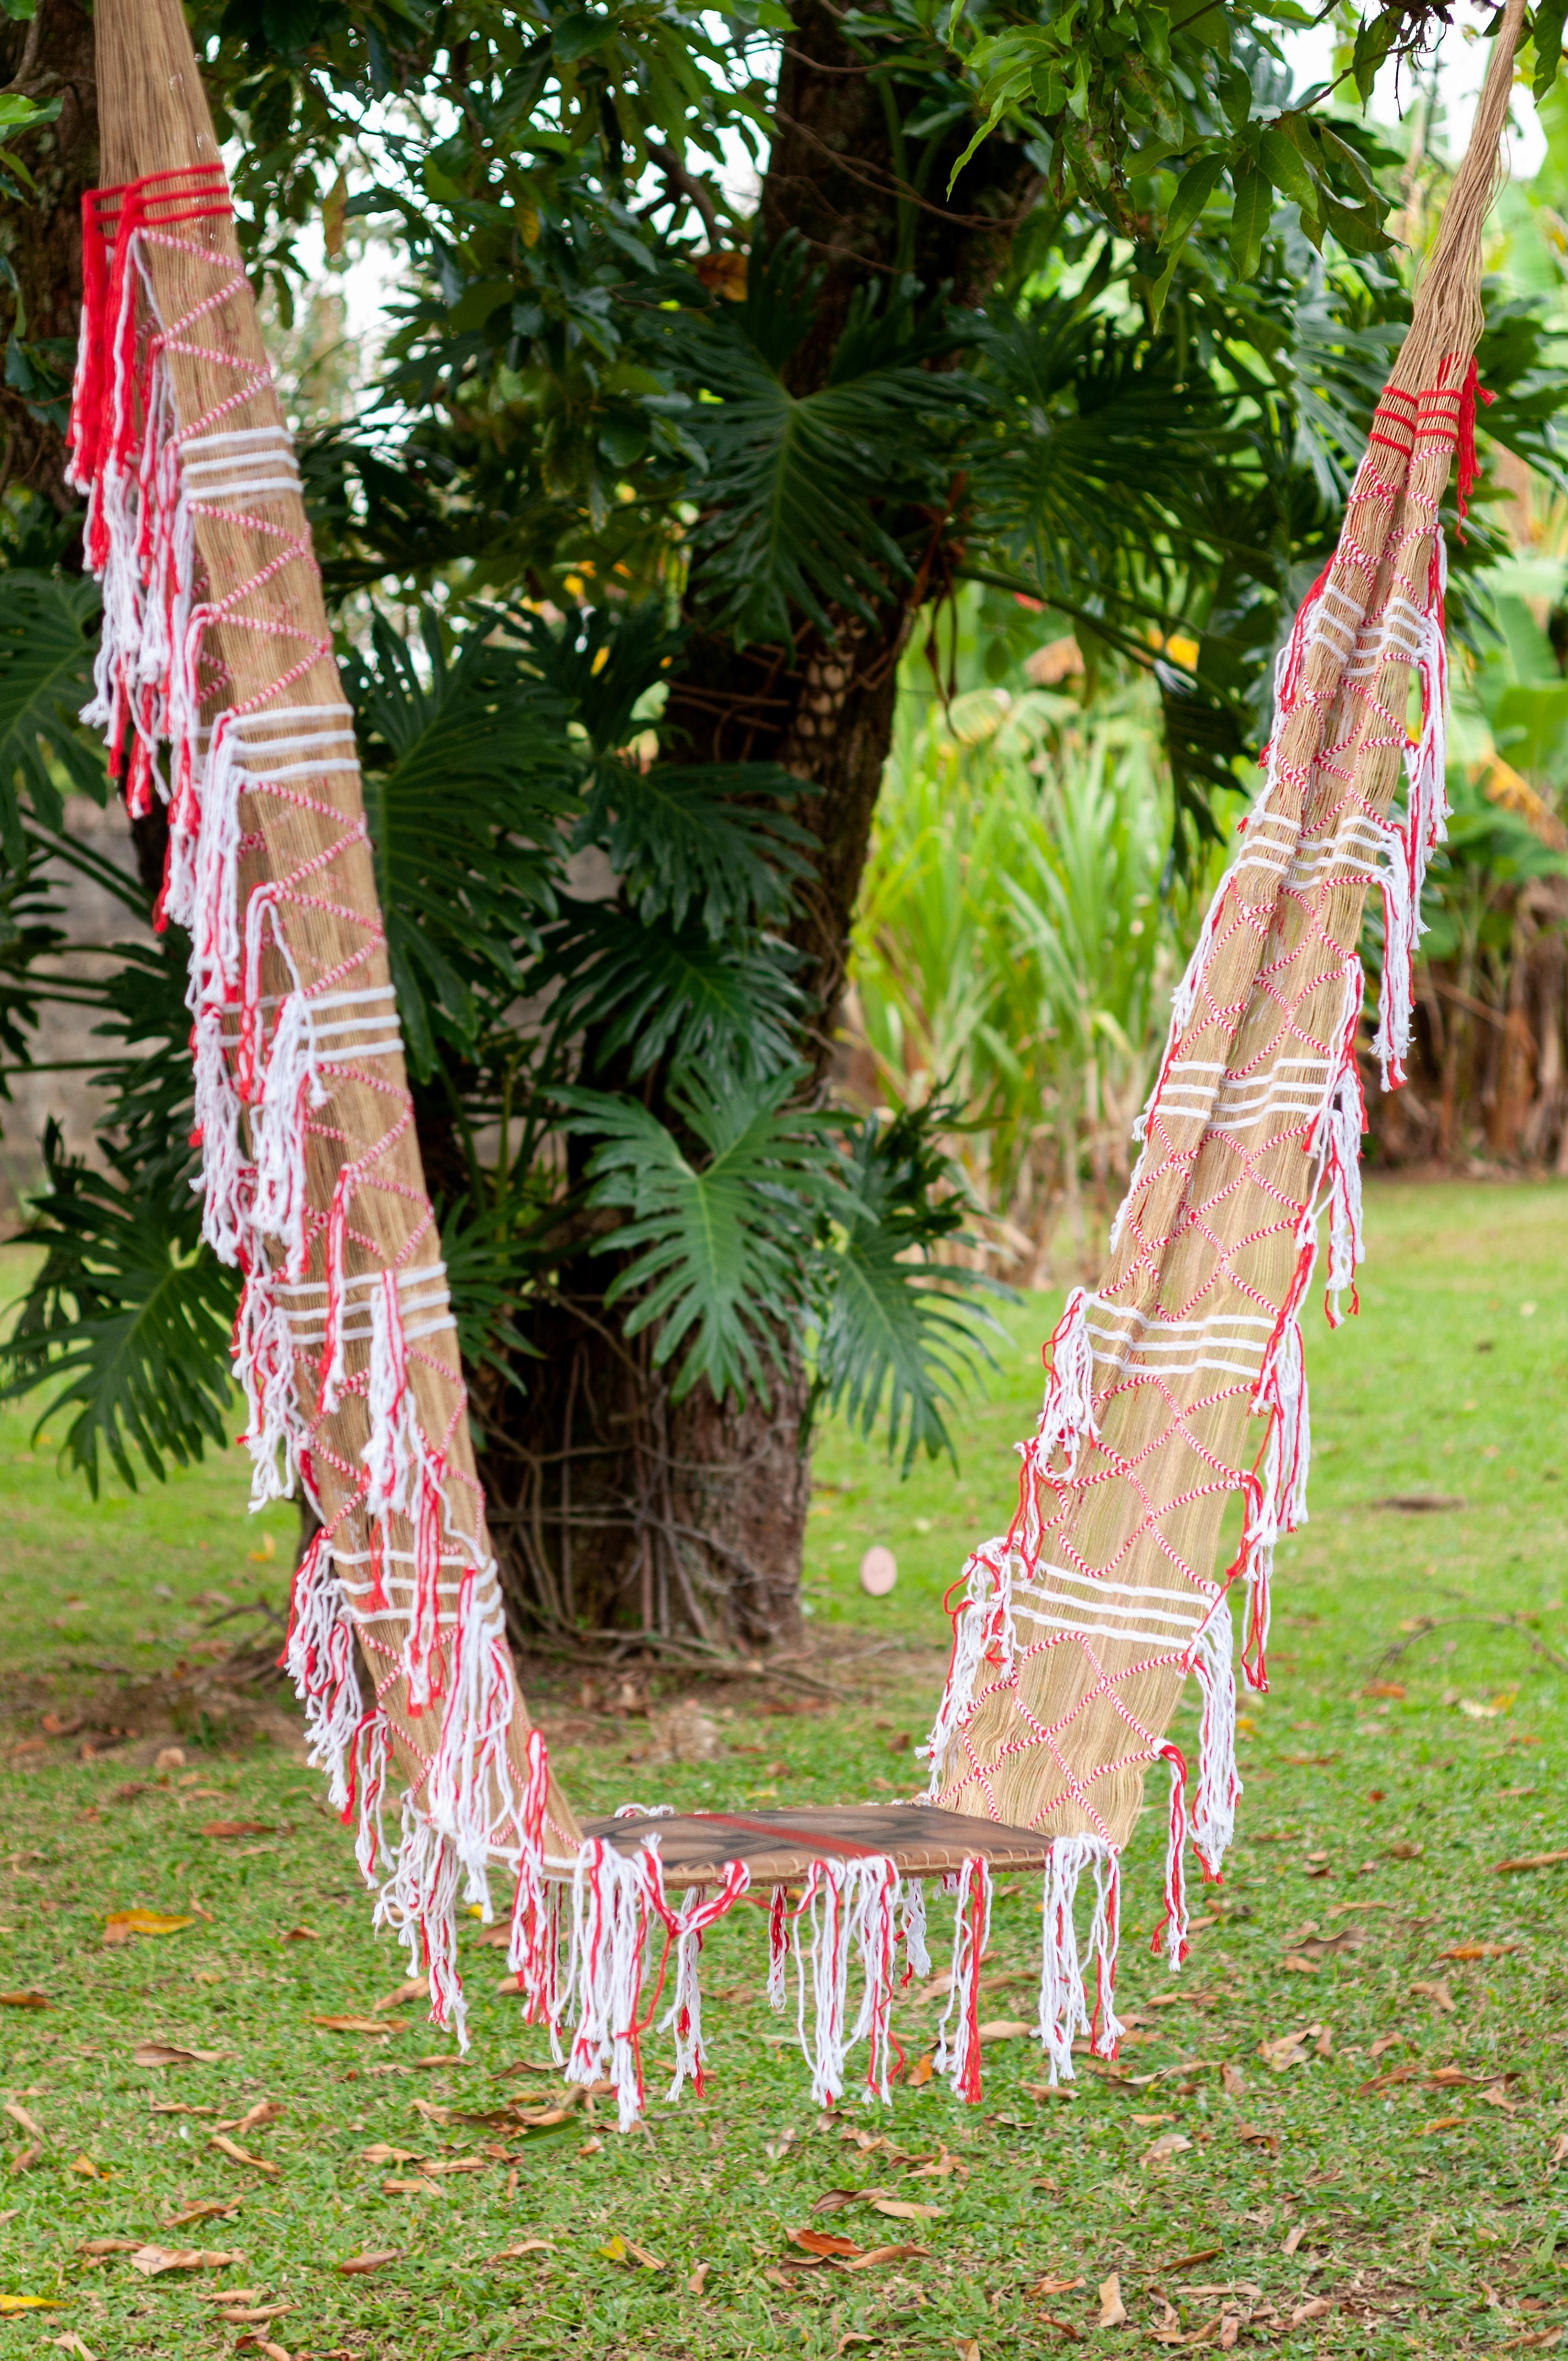 Hand-Woven Kaupüna Swing: handcrafted in the Xingu Indigenous Territory, Brazil For Sale